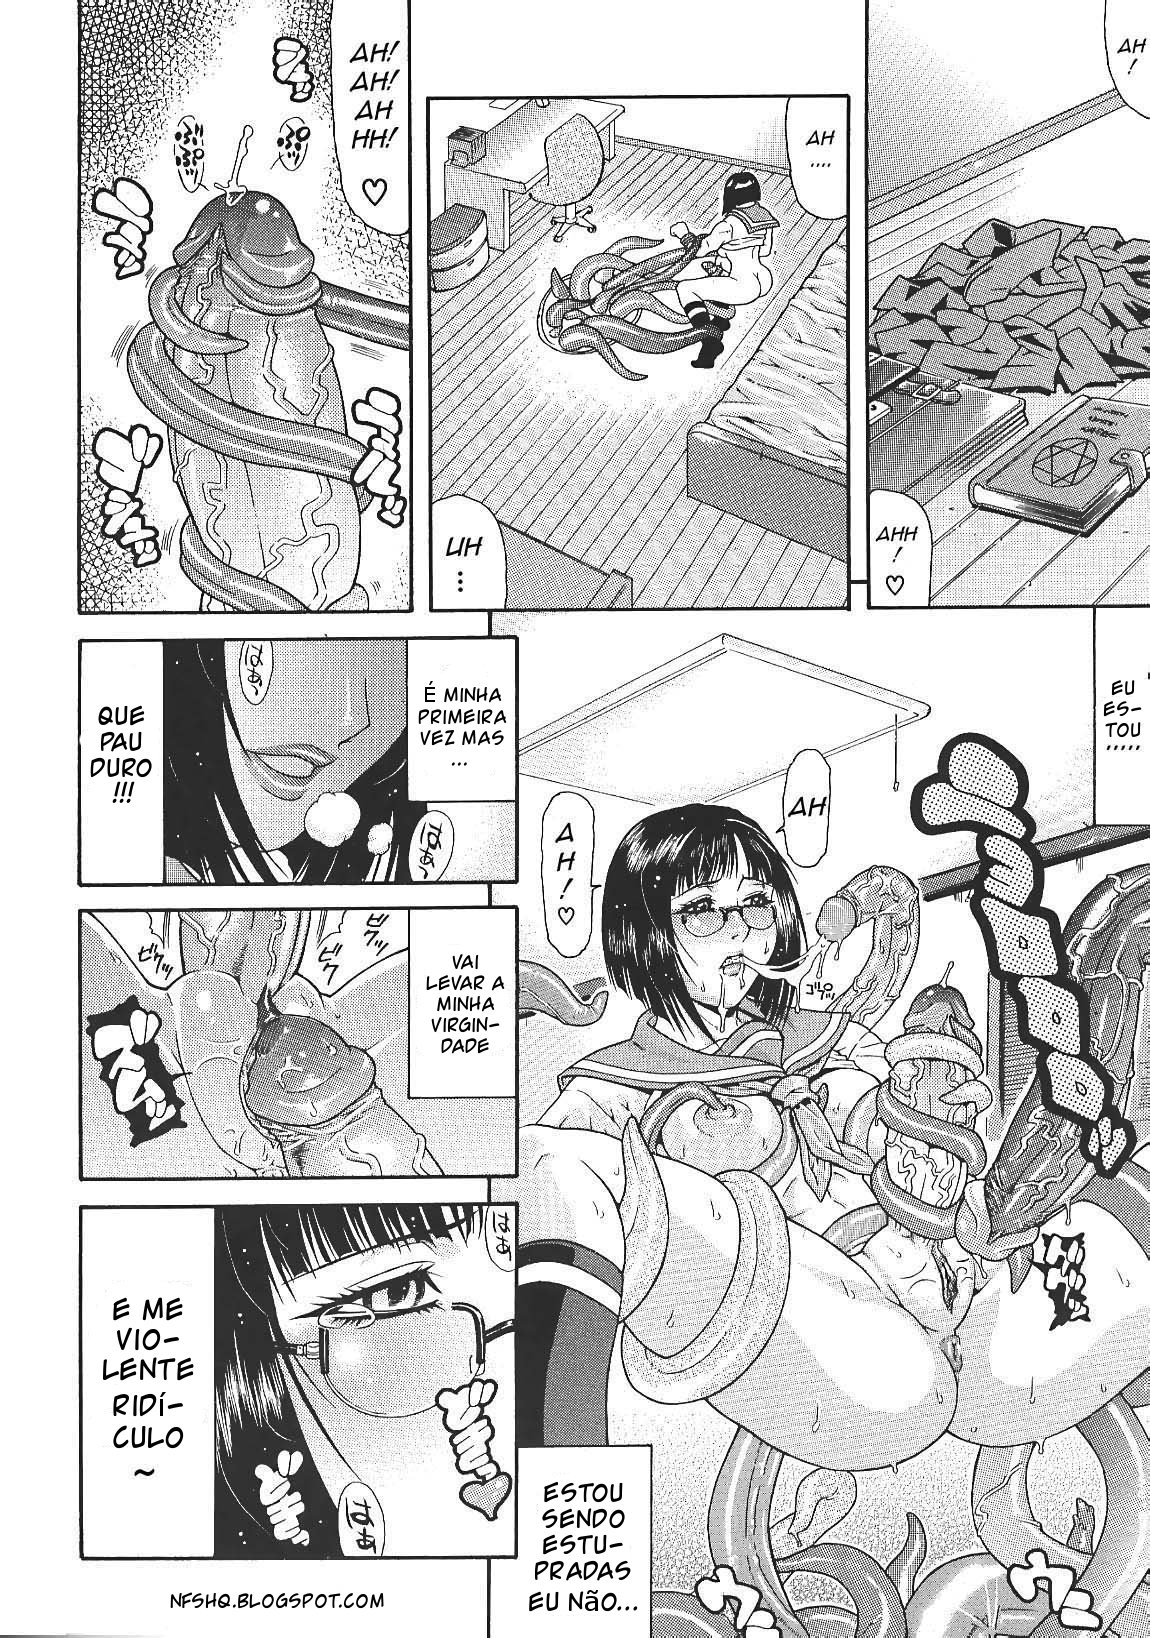 Gura Nyuutou - Escape chapter 1 [translated and uncensored] PT-BR 